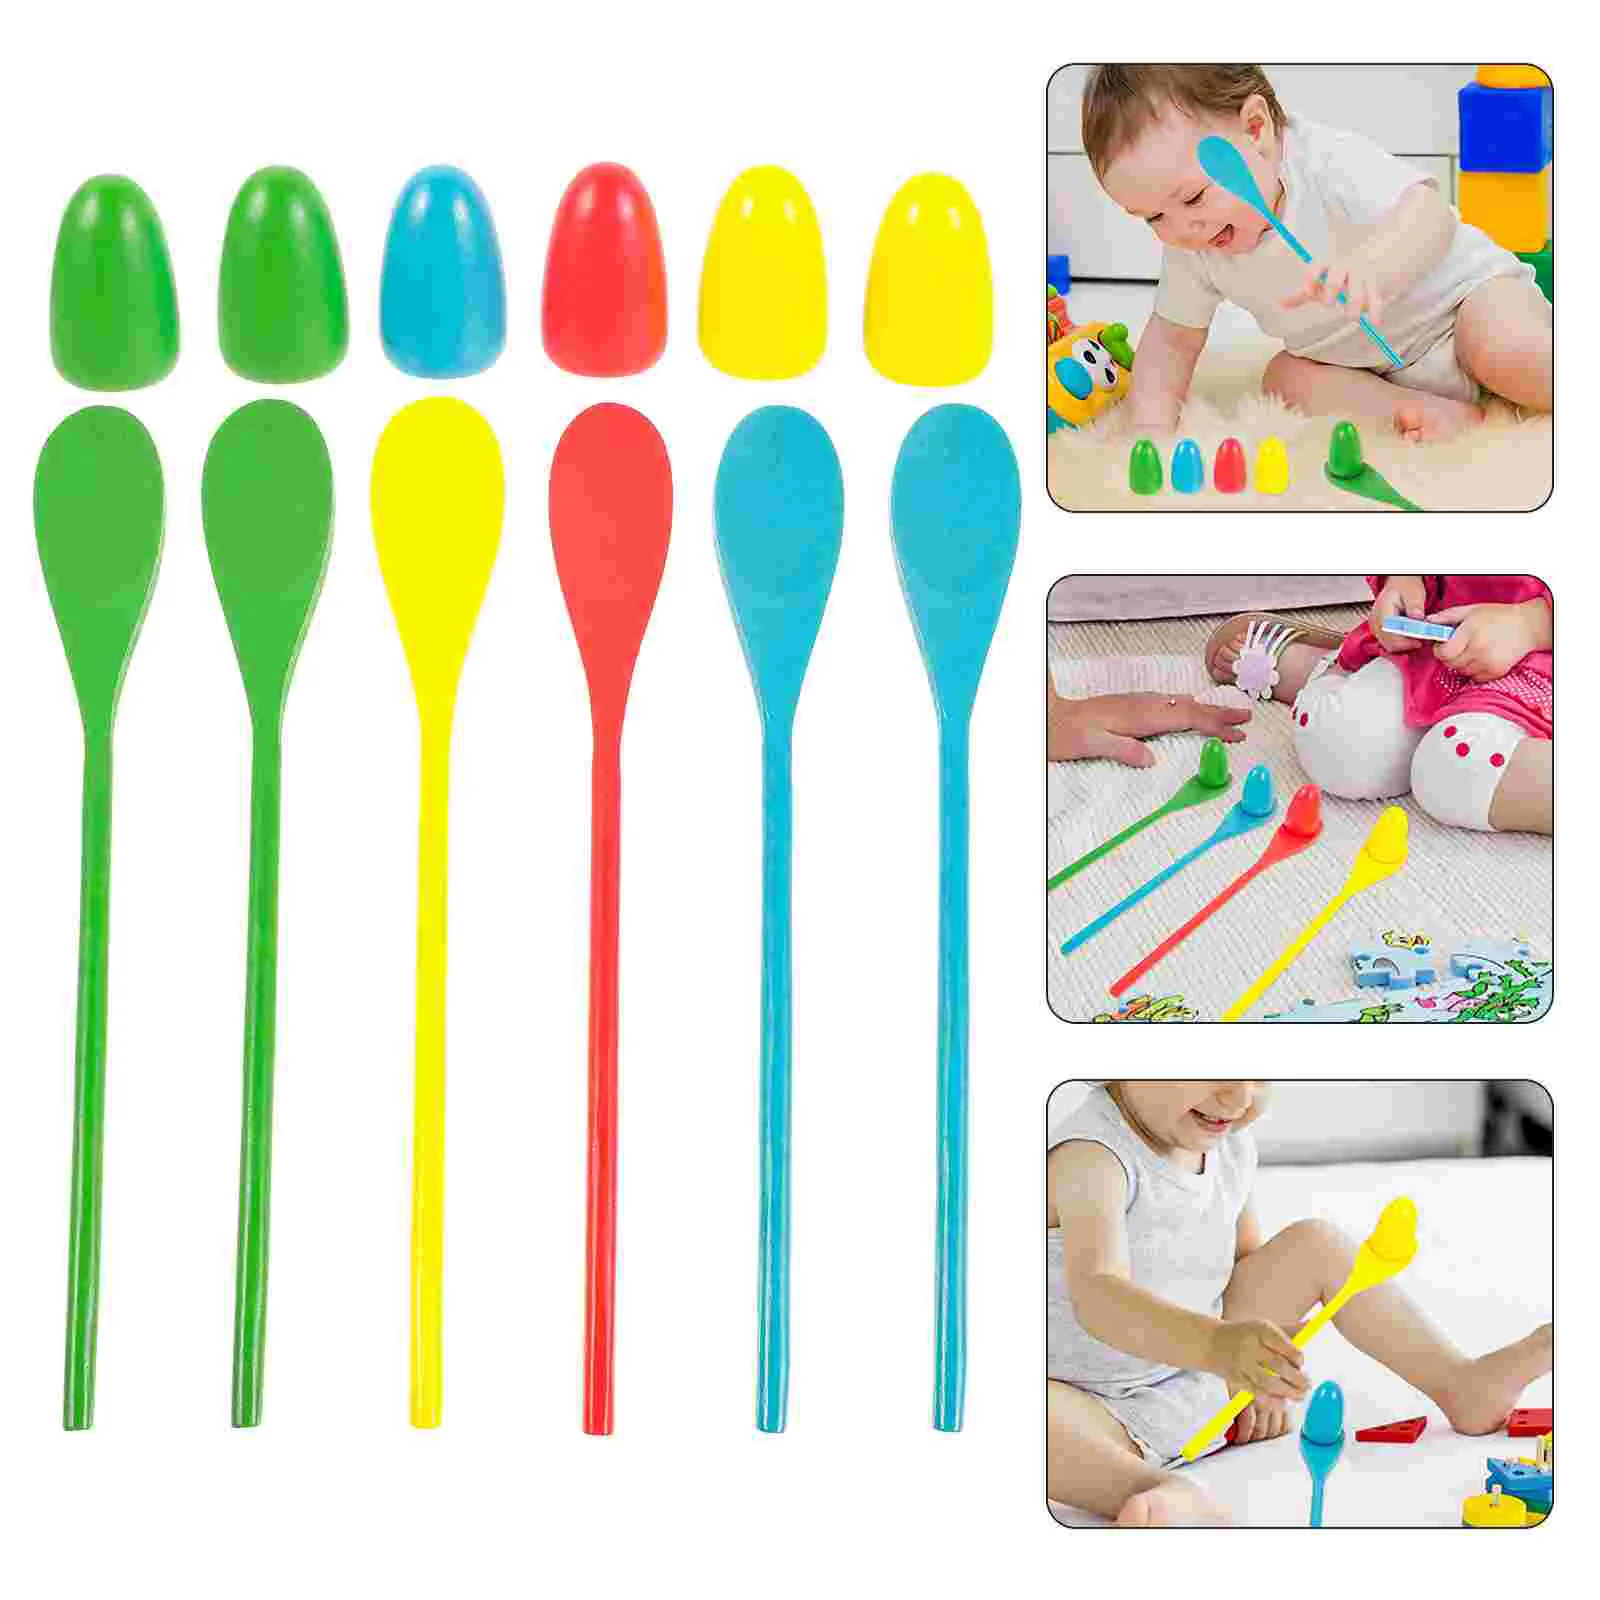 

Wooden Spoon Toss Interesting Kids Plaything Sturdy Children Toy Interactive Learning Reusable Sensory Outdoor Toddler Toys